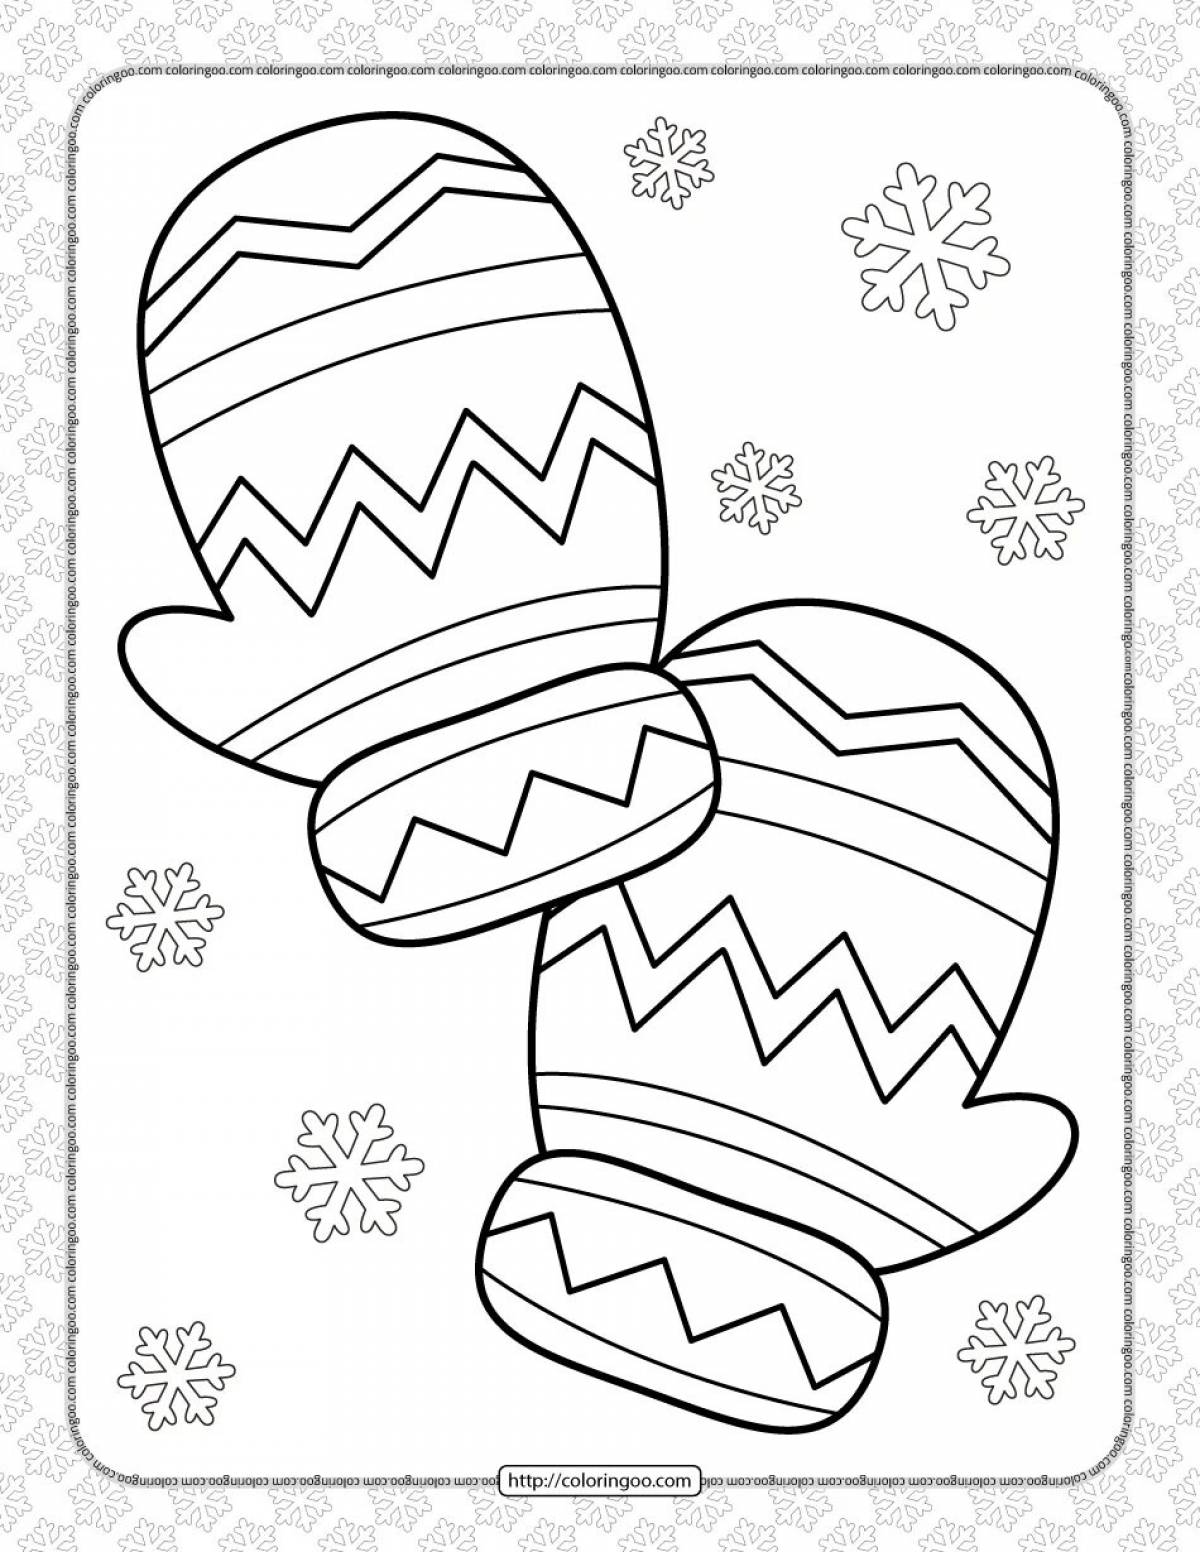 Live coloring baby mitten